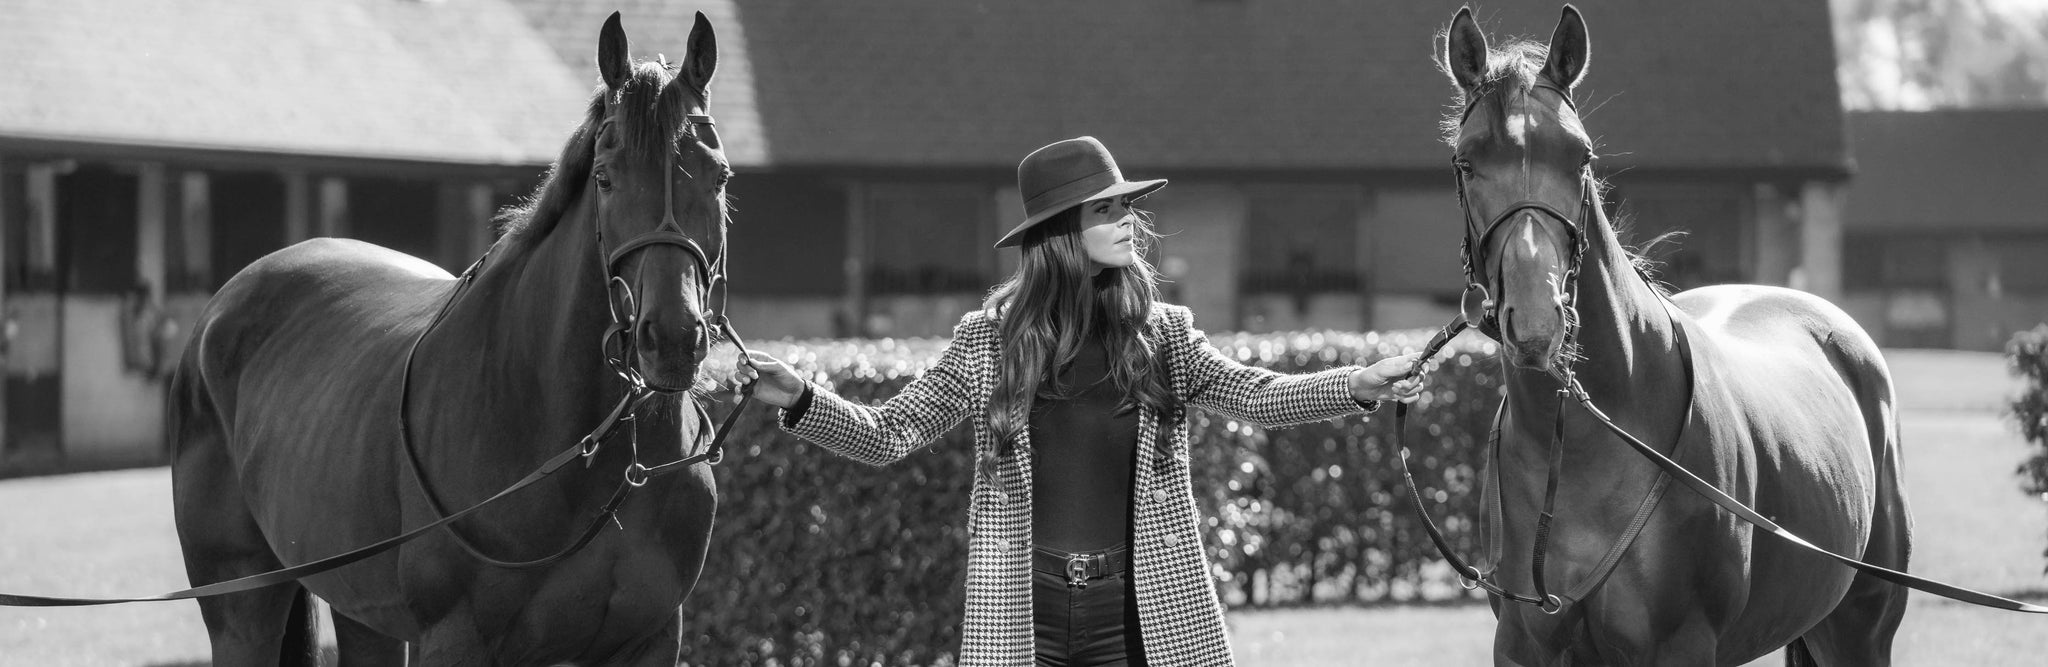 Black and white image with woman stood between two horses holding the bridle dressed in trilby hat and long houndstooth coat